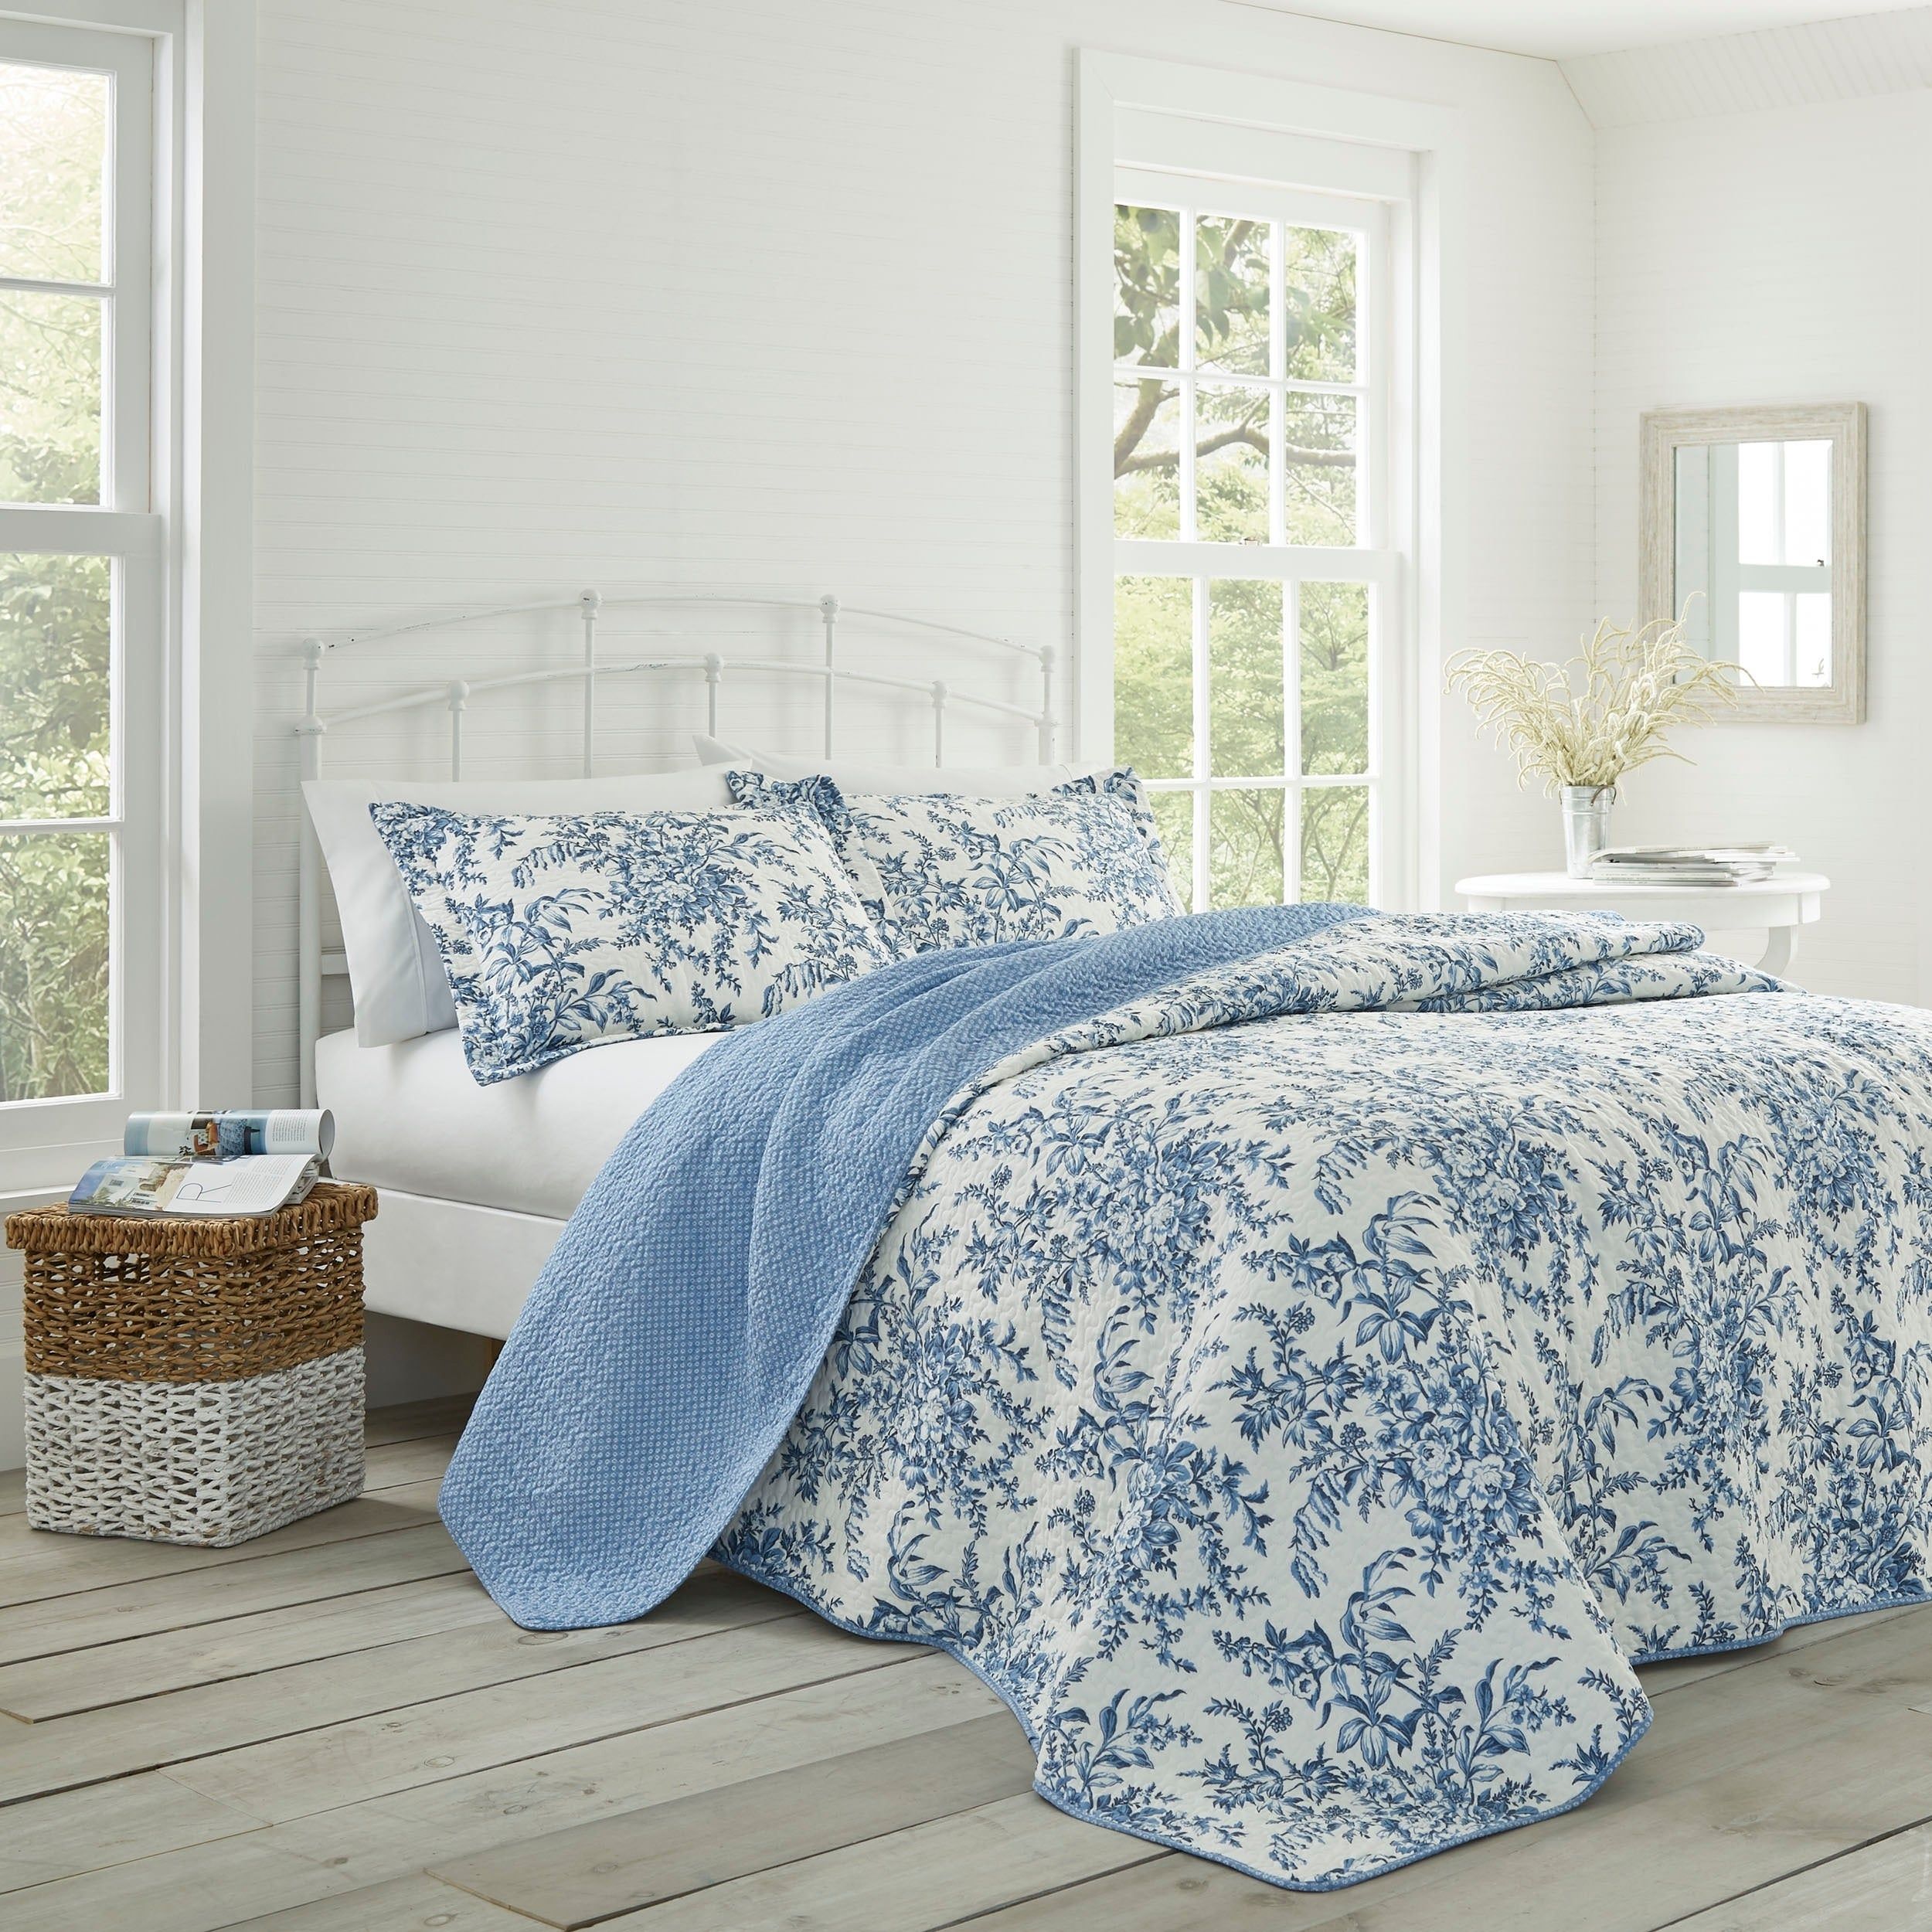 Bedfo 3 Piece Dining Sets Inside Most Up To Date Shop Laura Ashley 3 Piece Bedford Blue Reversible Quilt Set – Free (View 19 of 20)